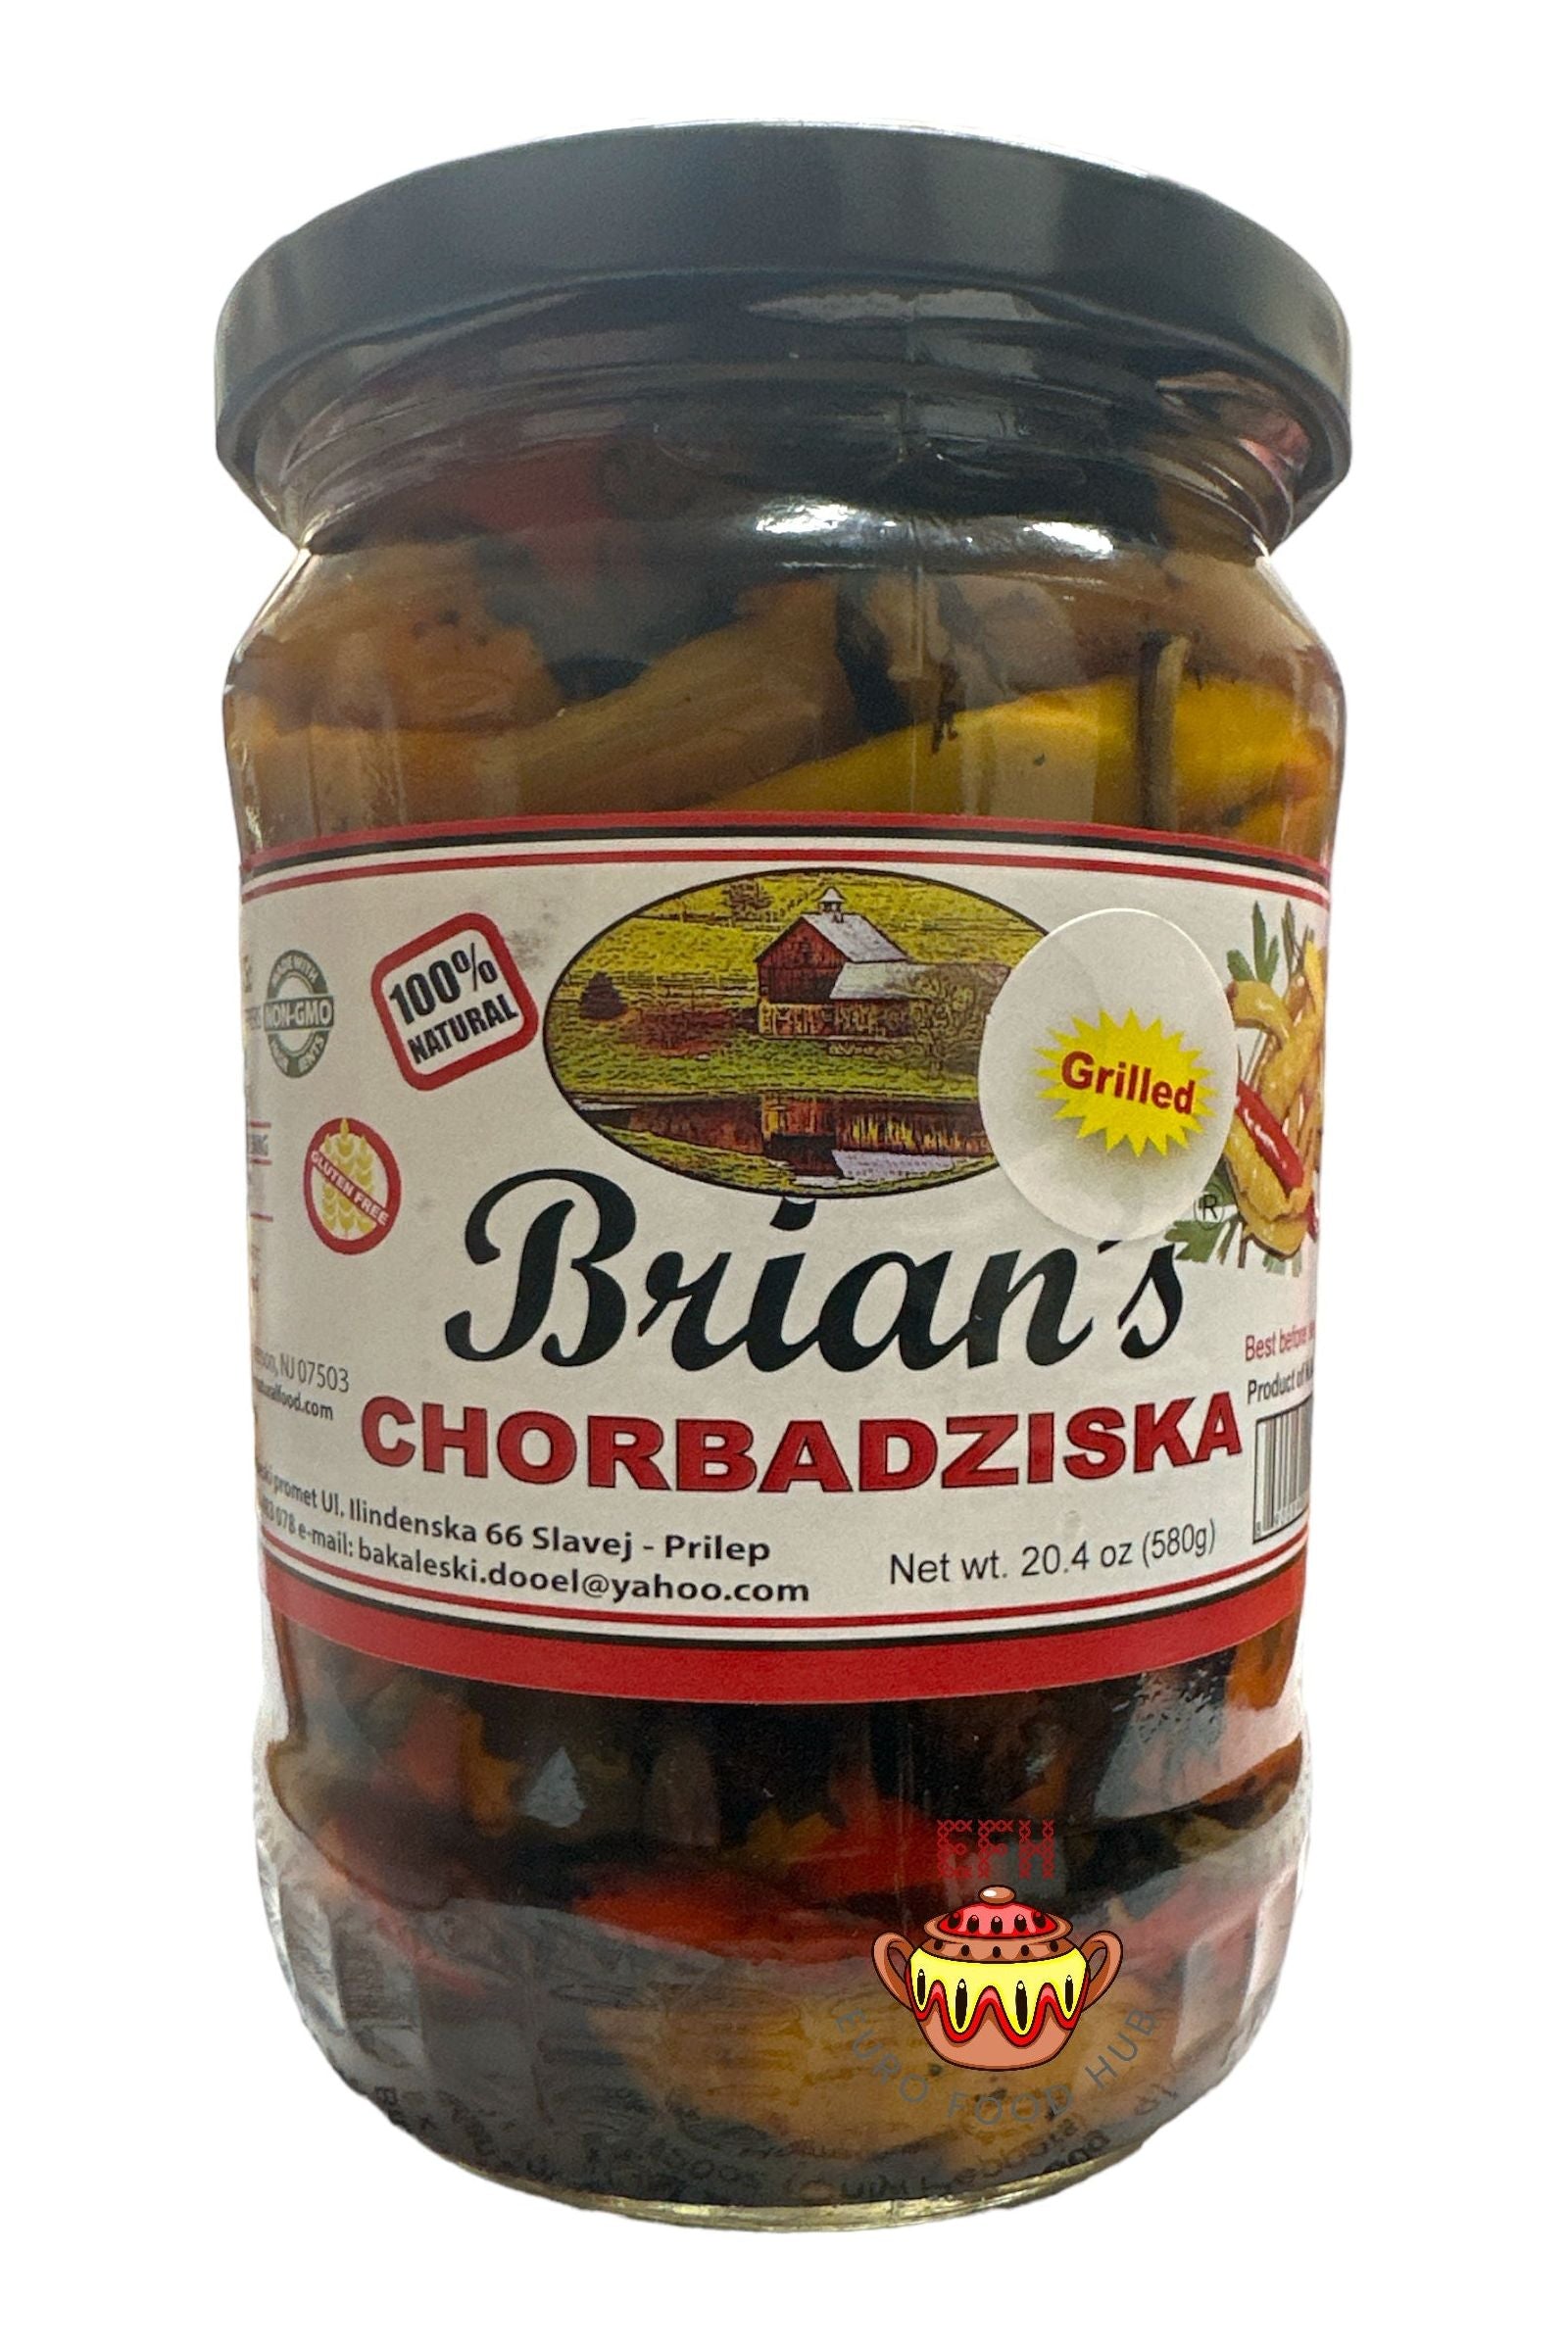 Brian's European Natural Products - ROASTED Chorbadziska Mild Peppers - 580g